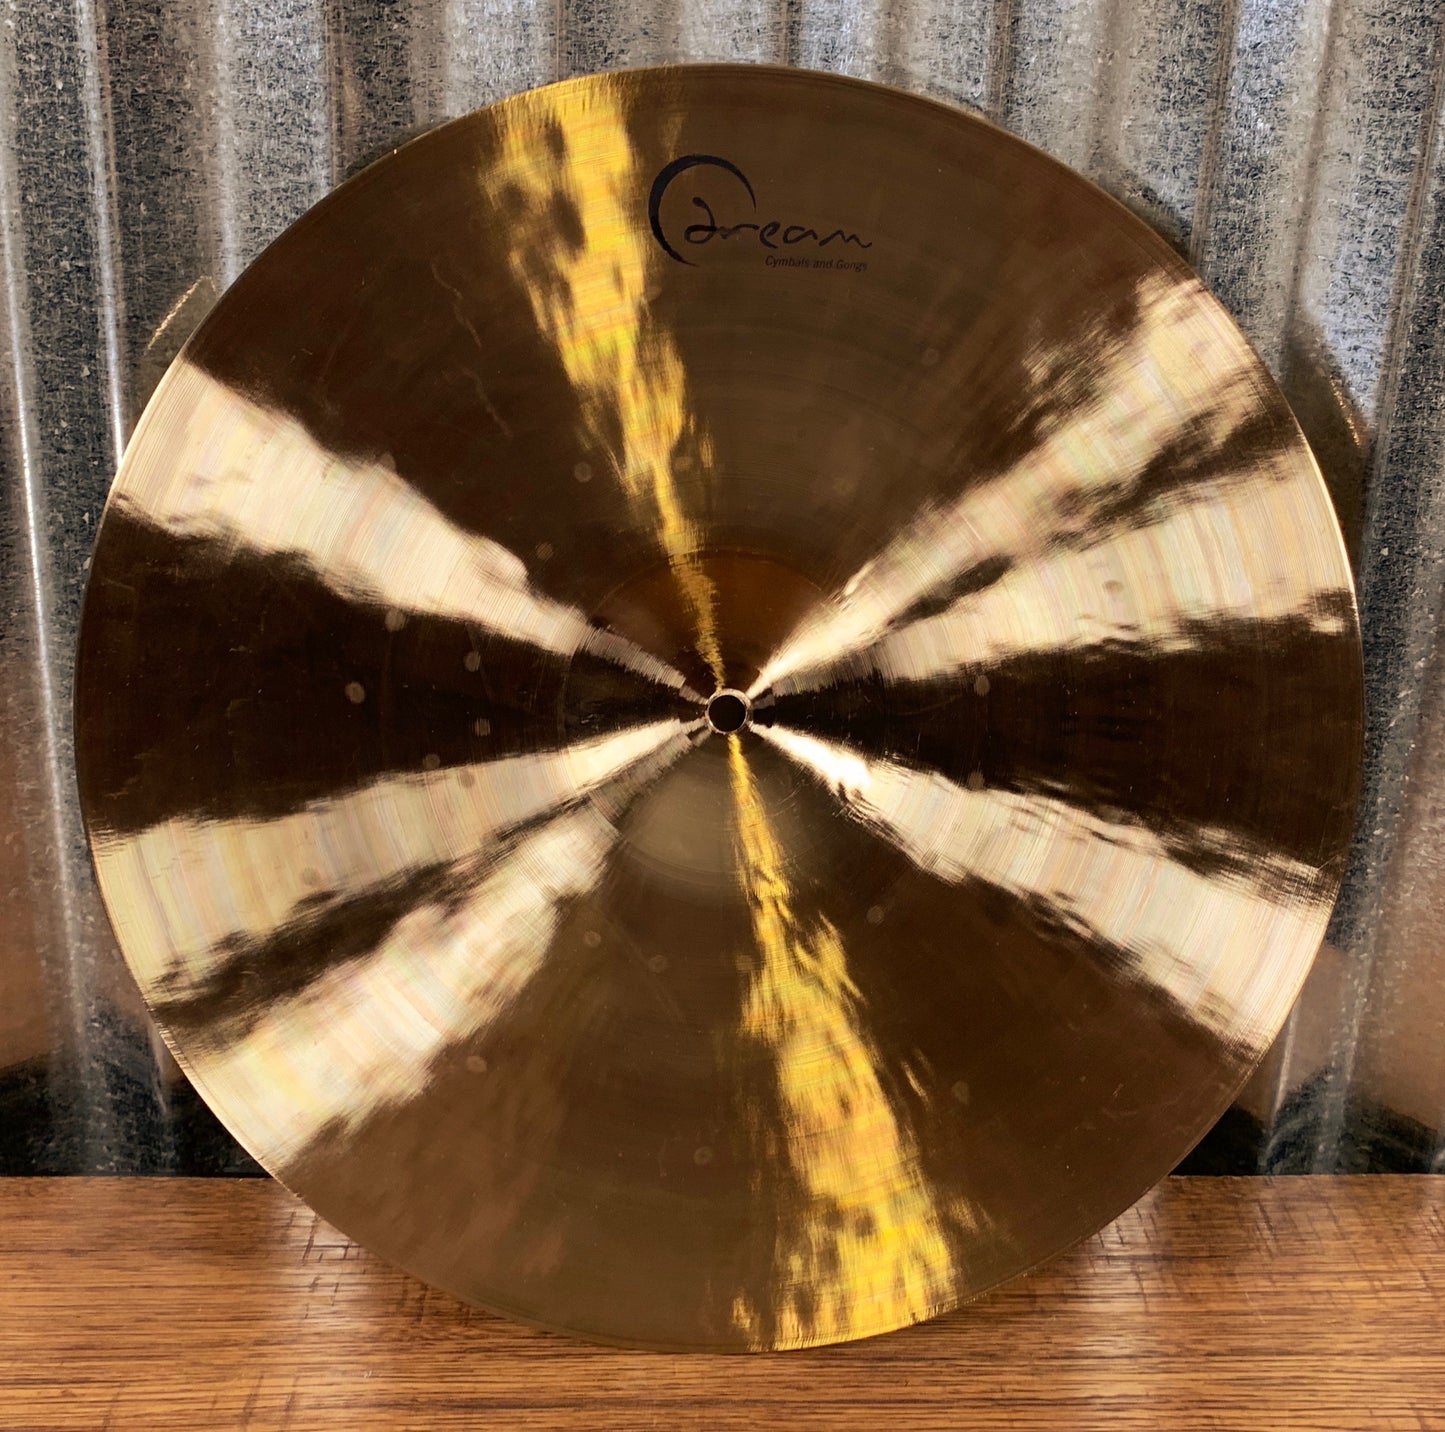 Dream Cymbals BCR16 Bliss Hand Forged and Hammered 16" Crash Demo